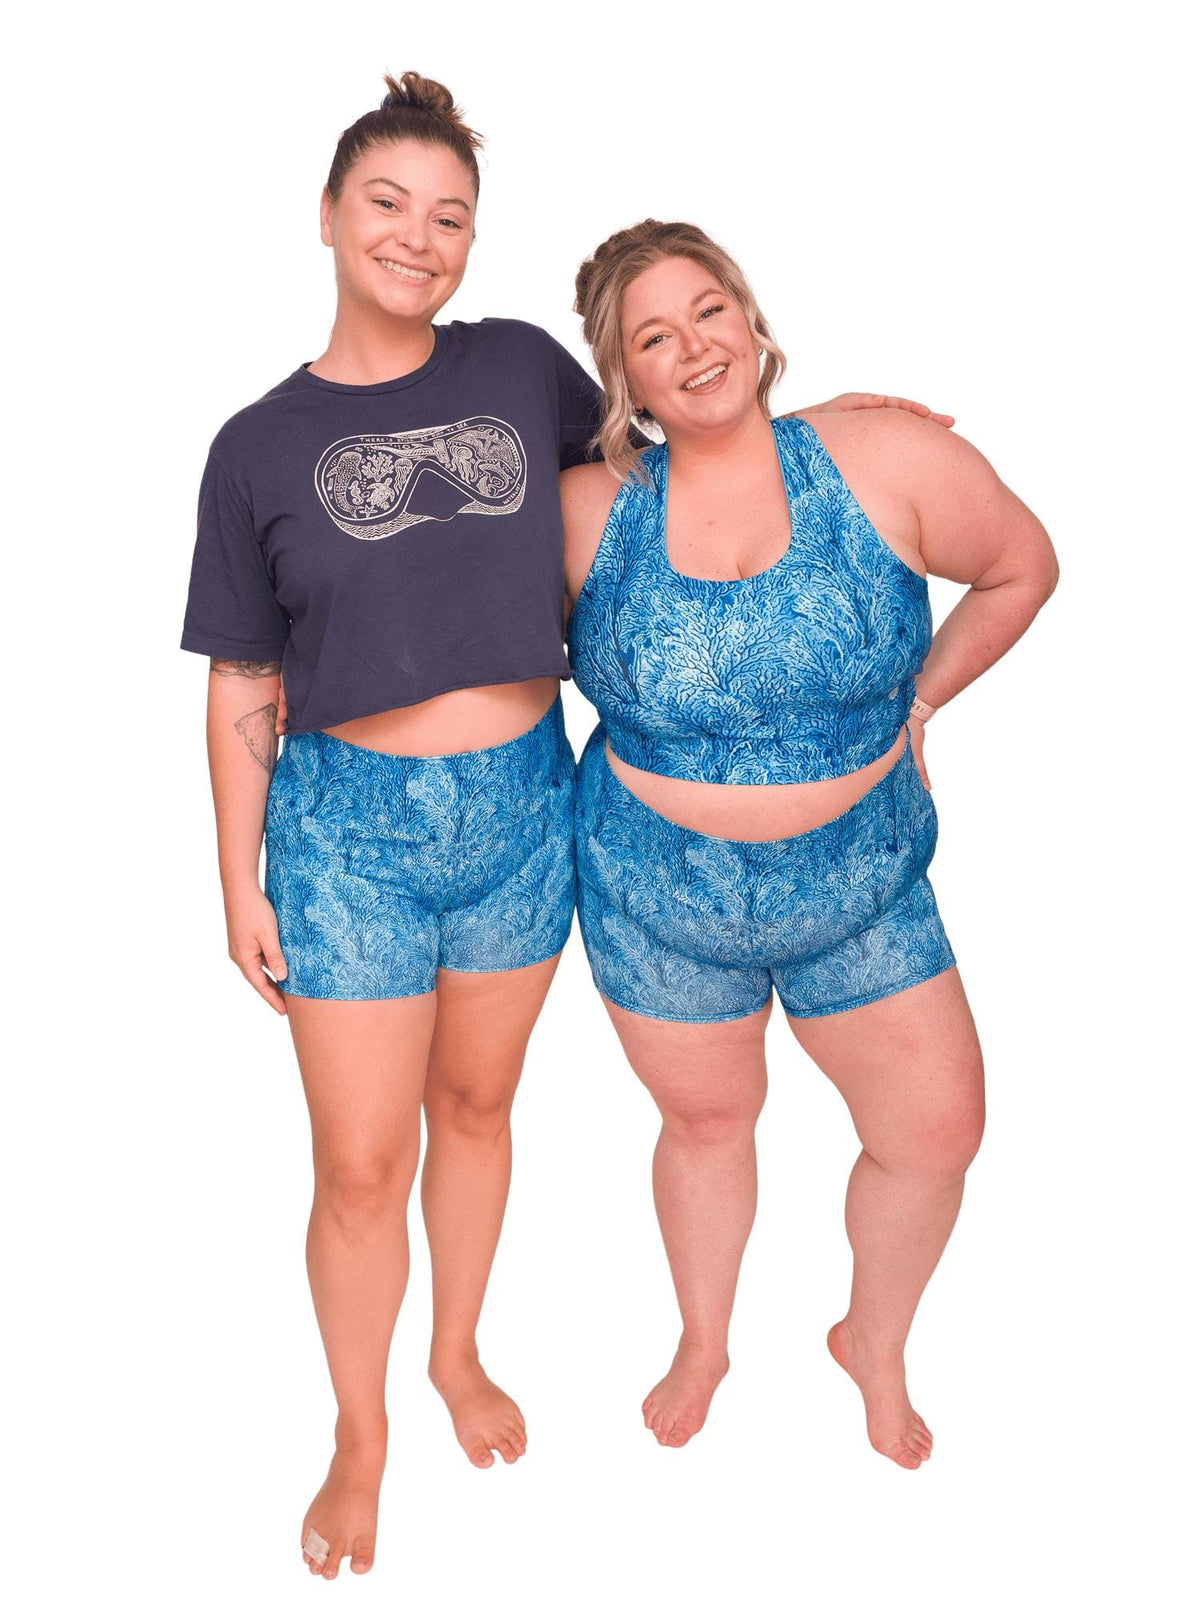 Model: Camilla (Left) is 5&#39;8&quot;, 190 lbs, a 36C, and wearing an XL shorts and L tee. Chelsea (Right) is 5&#39;2&quot;, 230 lbs, 40DD and is wearing 3XL shorts and a 3XL reversible top.